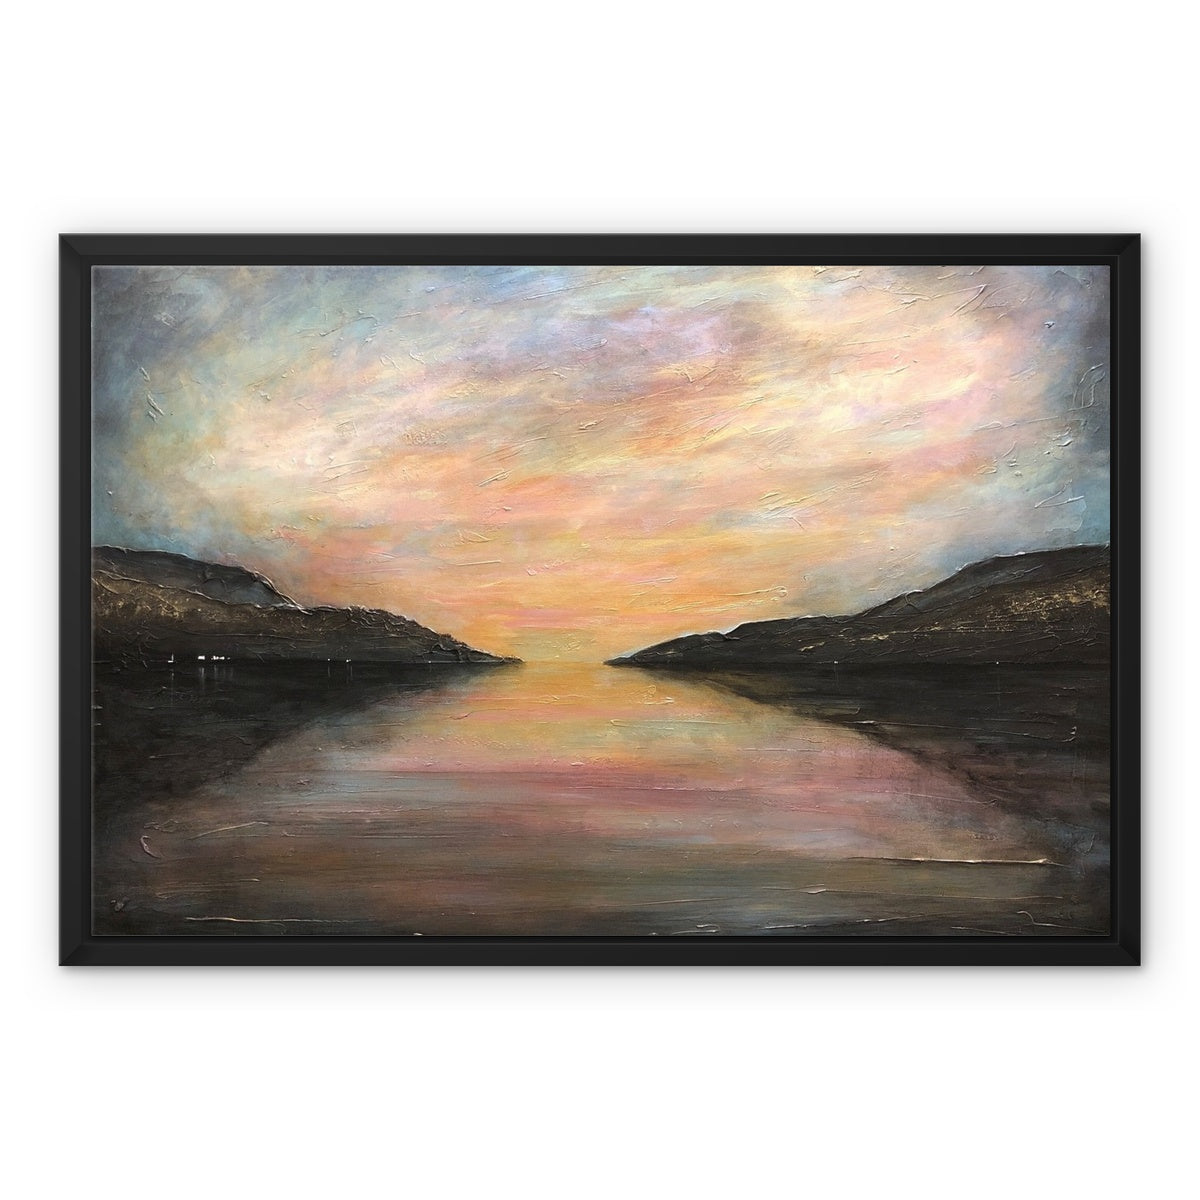 Loch Ness Glow Painting | Framed Canvas From Scotland-Floating Framed Canvas Prints-Scottish Lochs & Mountains Art Gallery-24"x18"-Black Frame-Paintings, Prints, Homeware, Art Gifts From Scotland By Scottish Artist Kevin Hunter